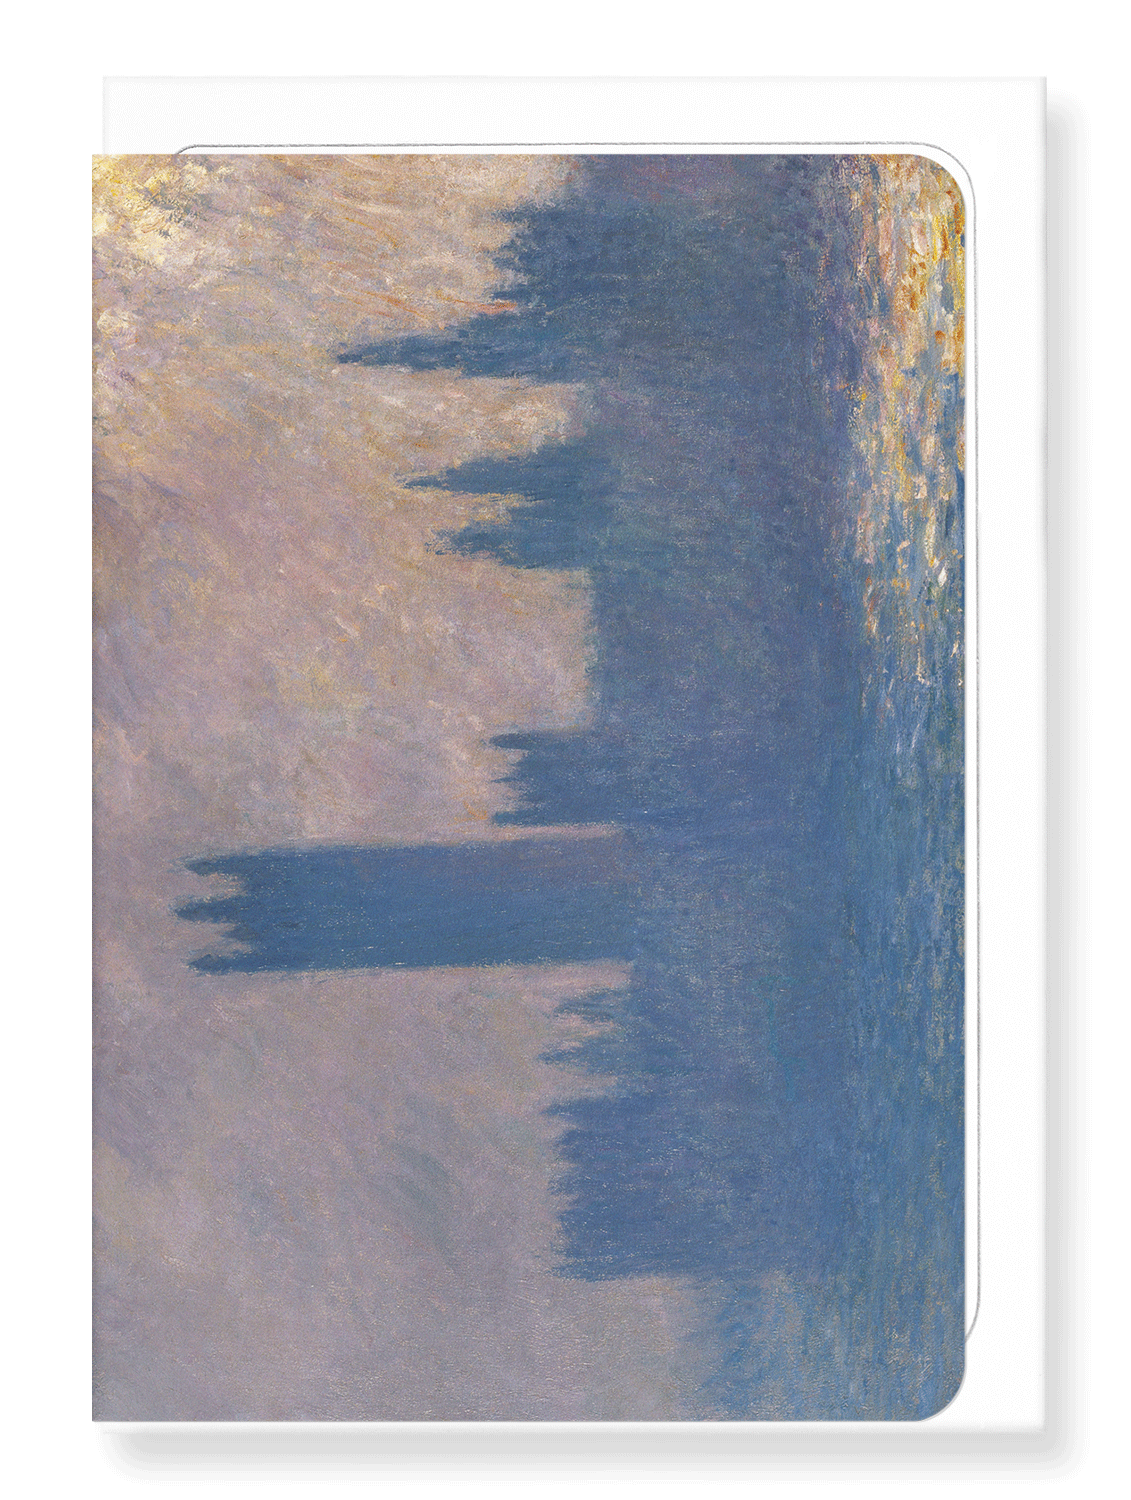 Ezen Designs - Houses of parliament sunlight by monet - Greeting Card - Front